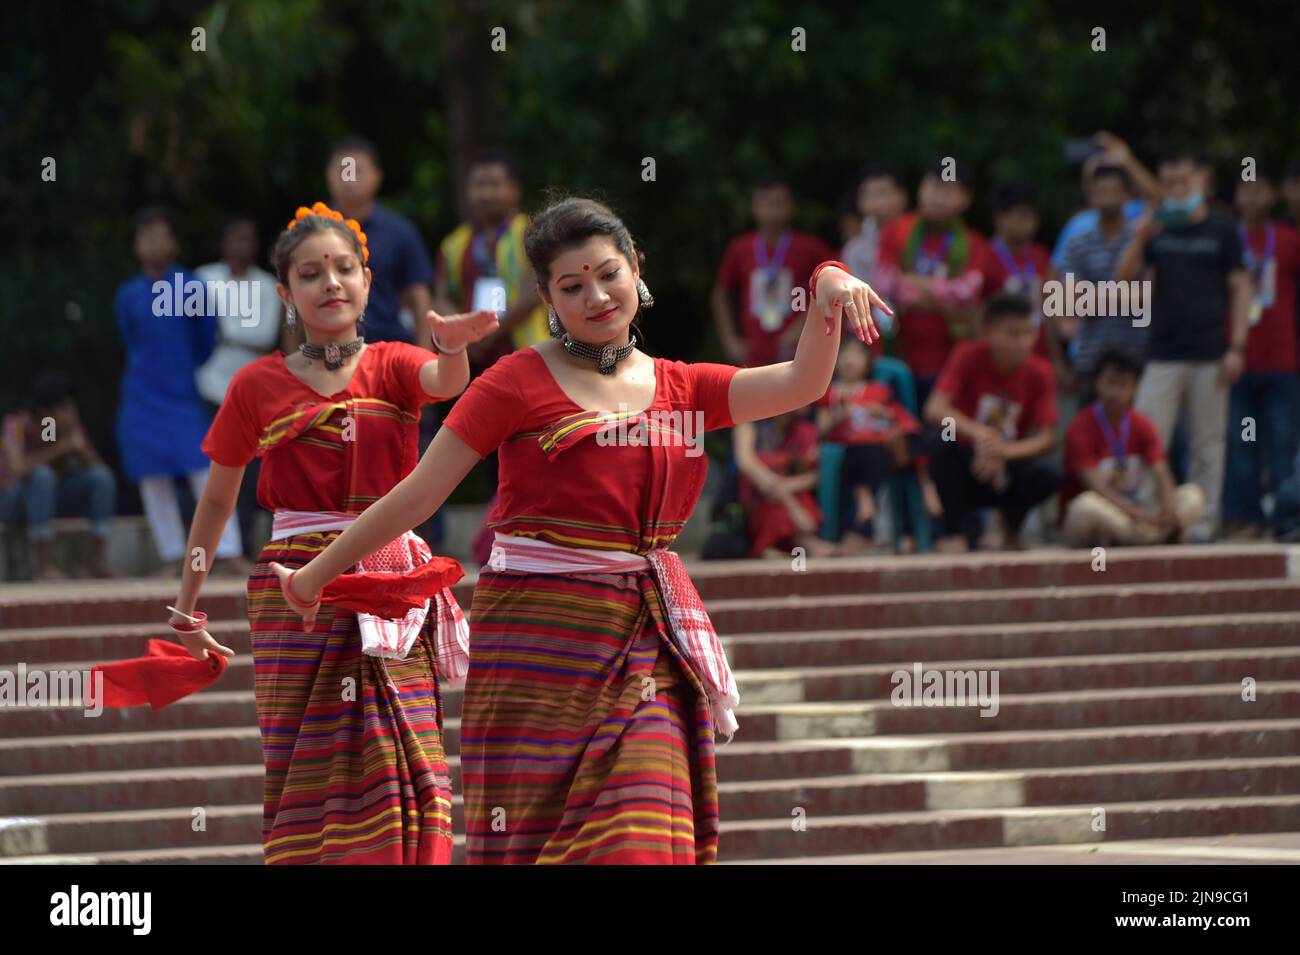 Dhaka. 10th Aug, 2022. People dance to celebrate the International Day of the World's Indigenous Peoples in Dhaka, Bangladesh, Aug. 9, 2022. The International Day of the World's Indigenous Peoples is marked every year on Aug. 9. Credit: Xinhua/Alamy Live News Stock Photo